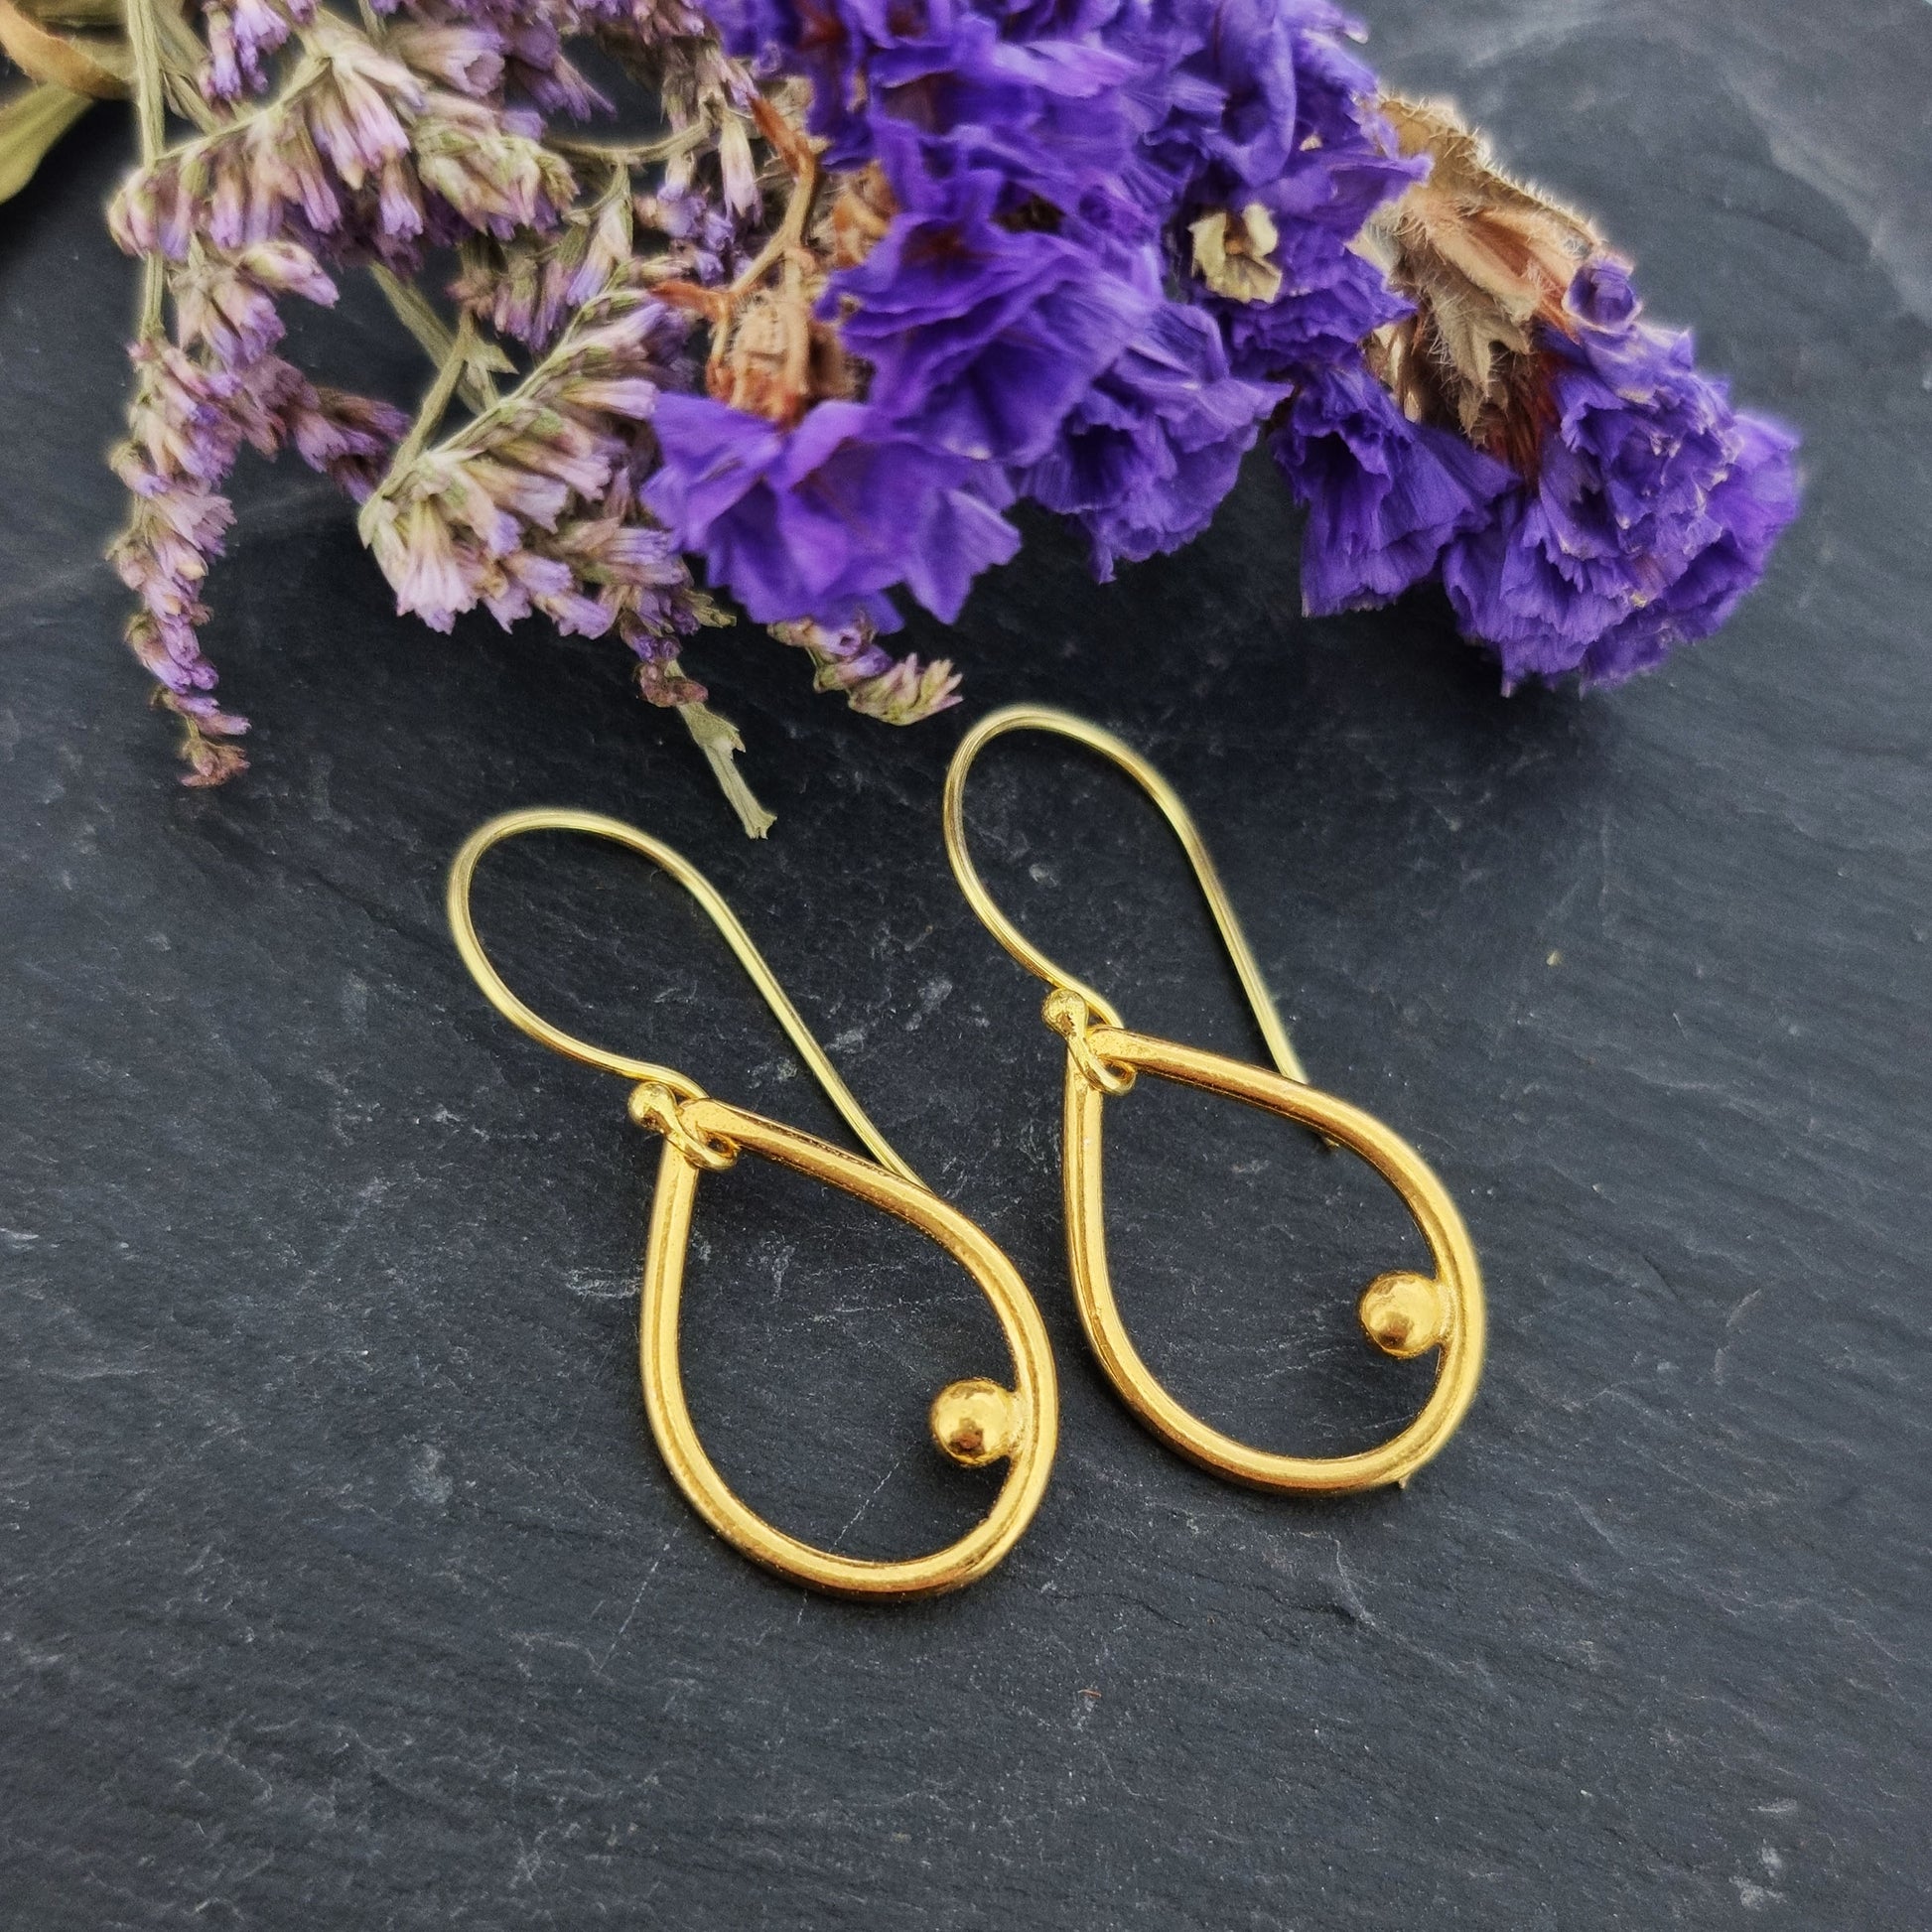 Yellow gold vermeil open teardrop with off-center ball drop earrings. Pictured with flowers.